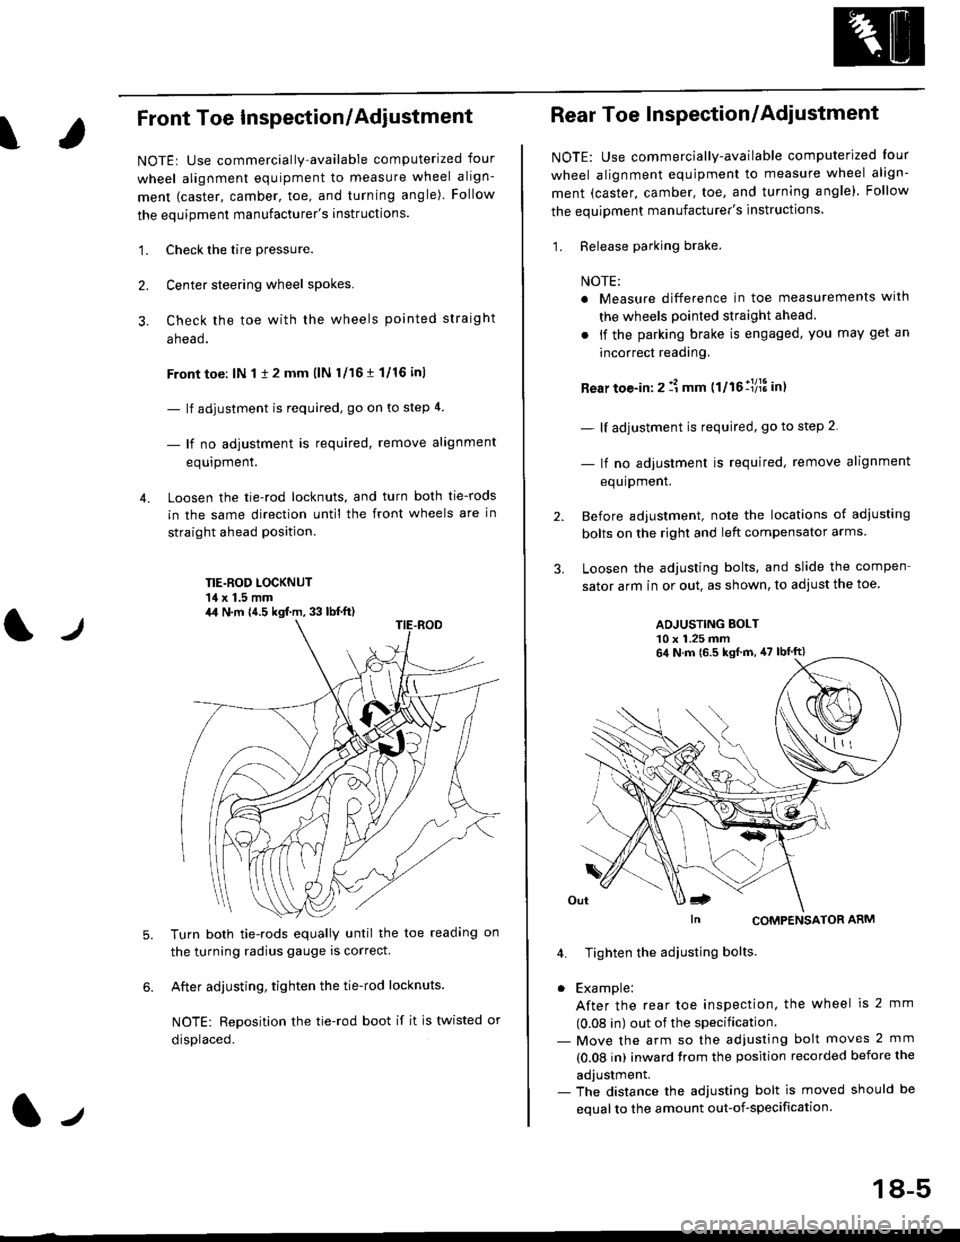 HONDA CIVIC 1997 6.G Workshop Manual ?
Front Toe Inspection/Adiustment
NOTE: Use commercially-available computerized four
wheel alignment equipment to measure wheel align-
ment (caster, camber, toe, and turning angle). Follow
the equipme